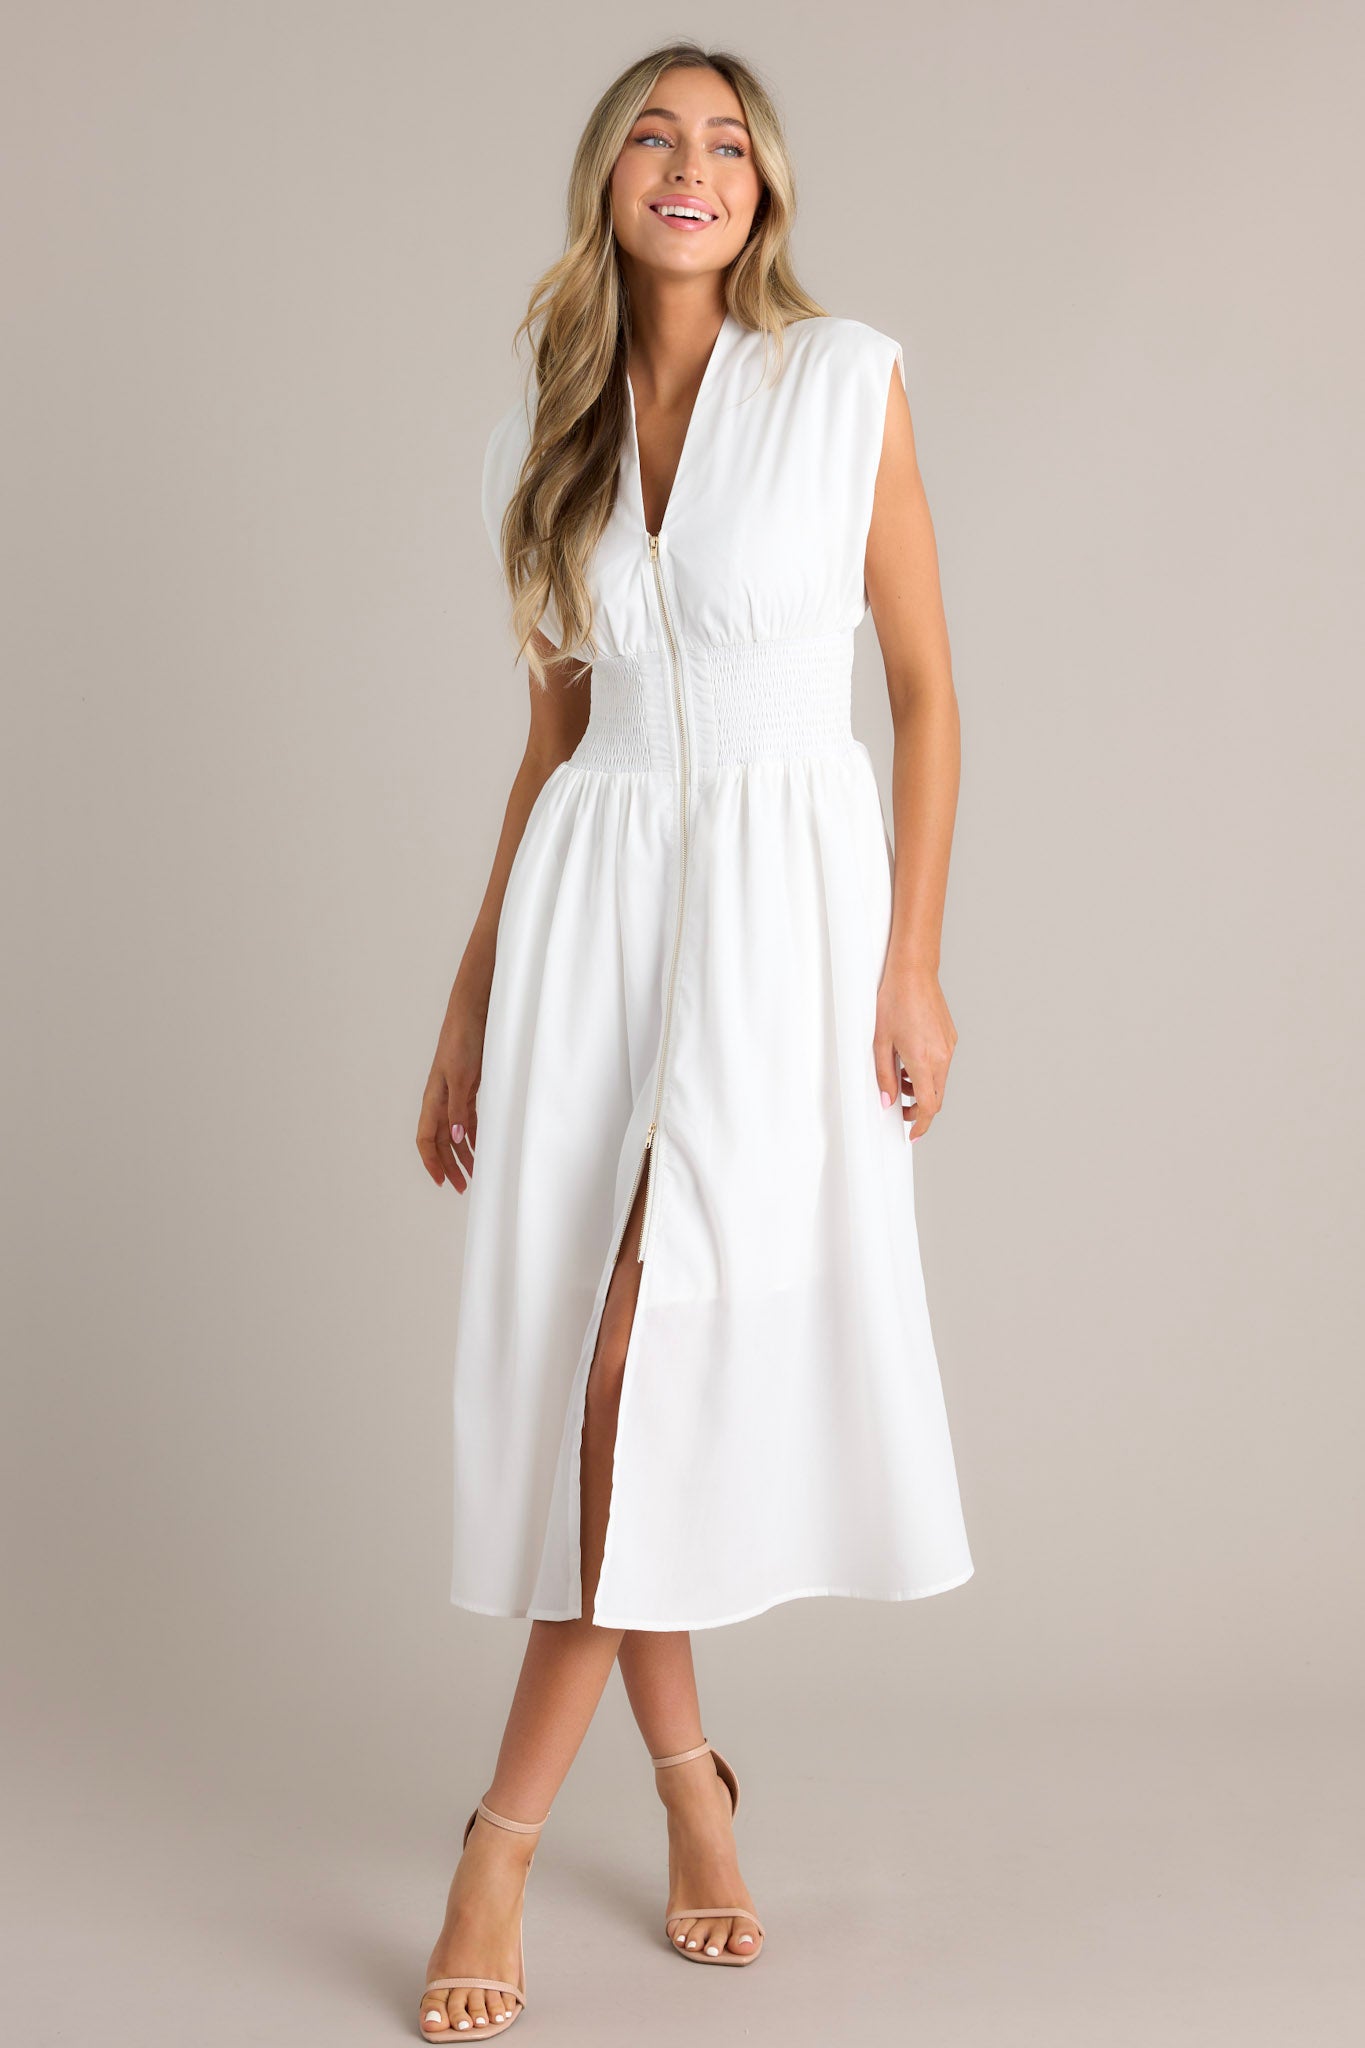 White dress with a V-neckline, cap sleeves, a zippered front, and a cinched waist with shirred detailing, featuring a flowing midi-length skirt with a front slit.